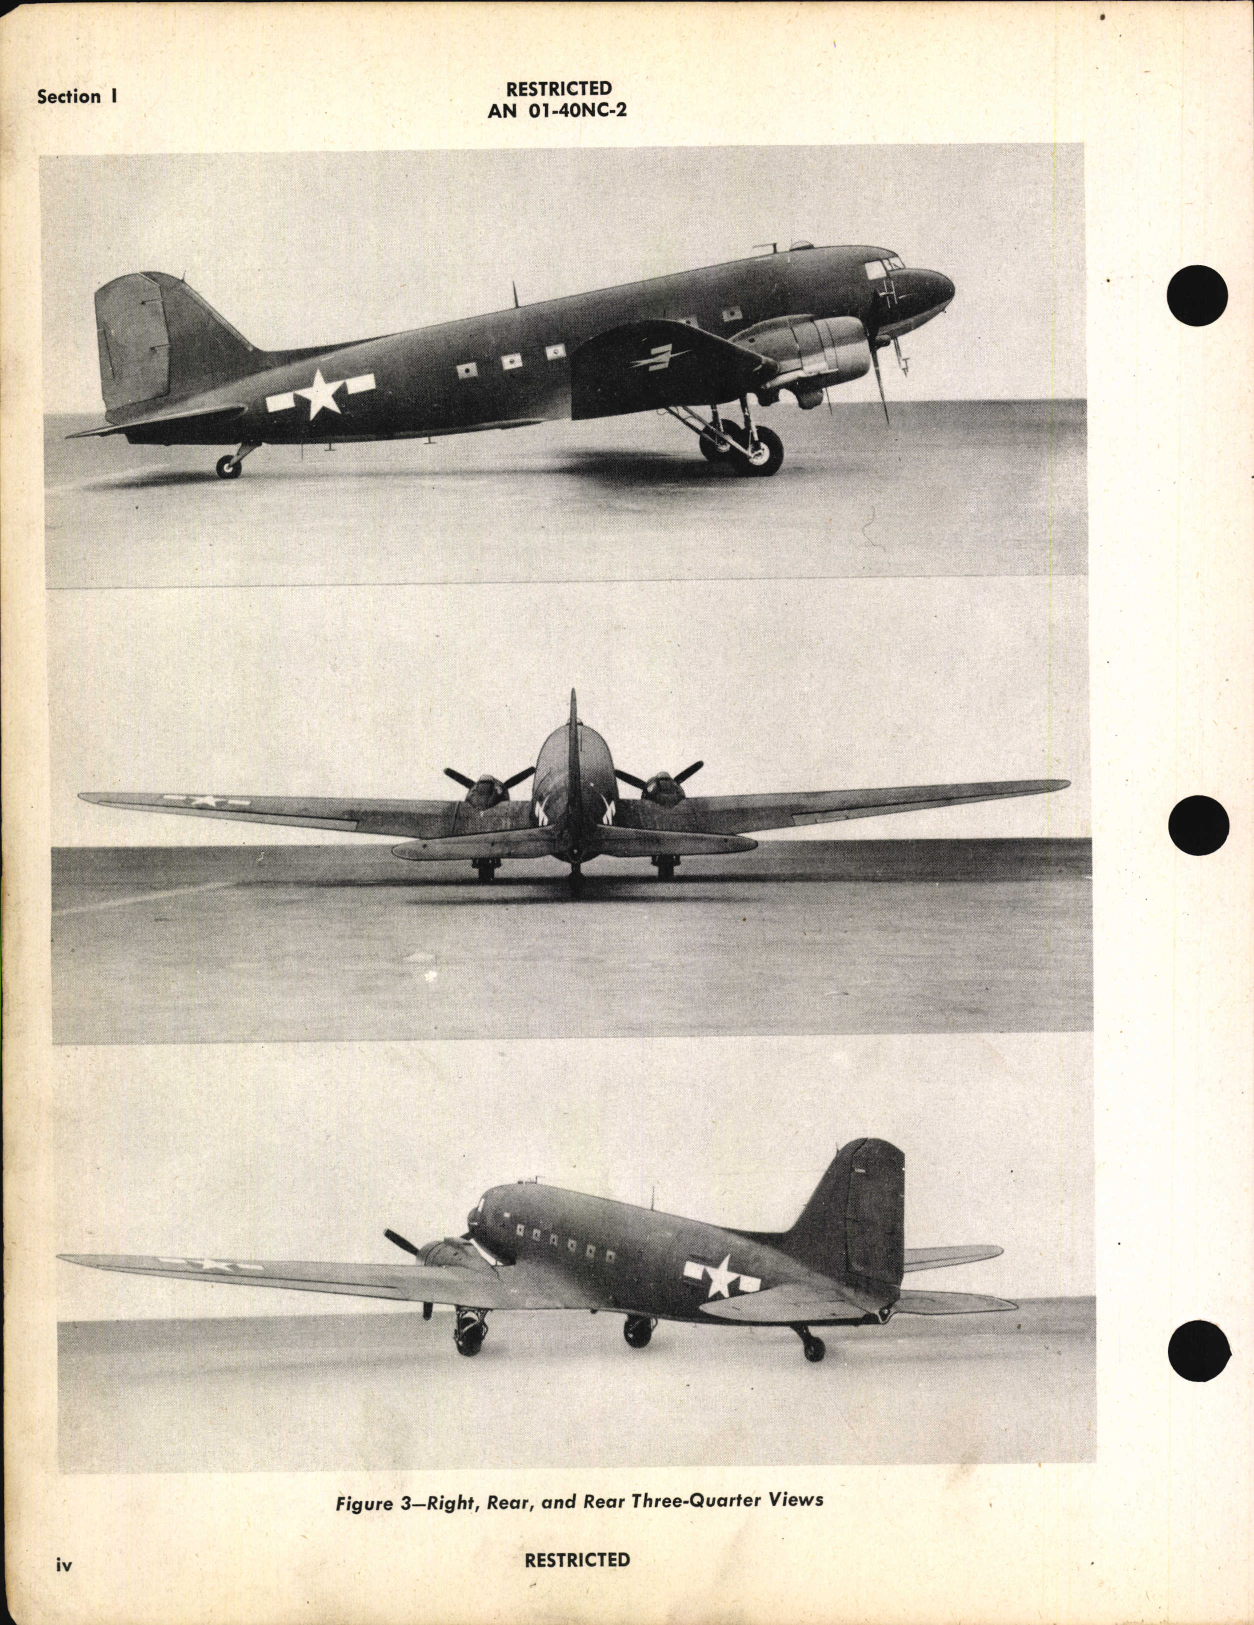 Sample page 6 from AirCorps Library document: Erection and Maintenance for C-47, C-47A, R4D-1, and R4D-5